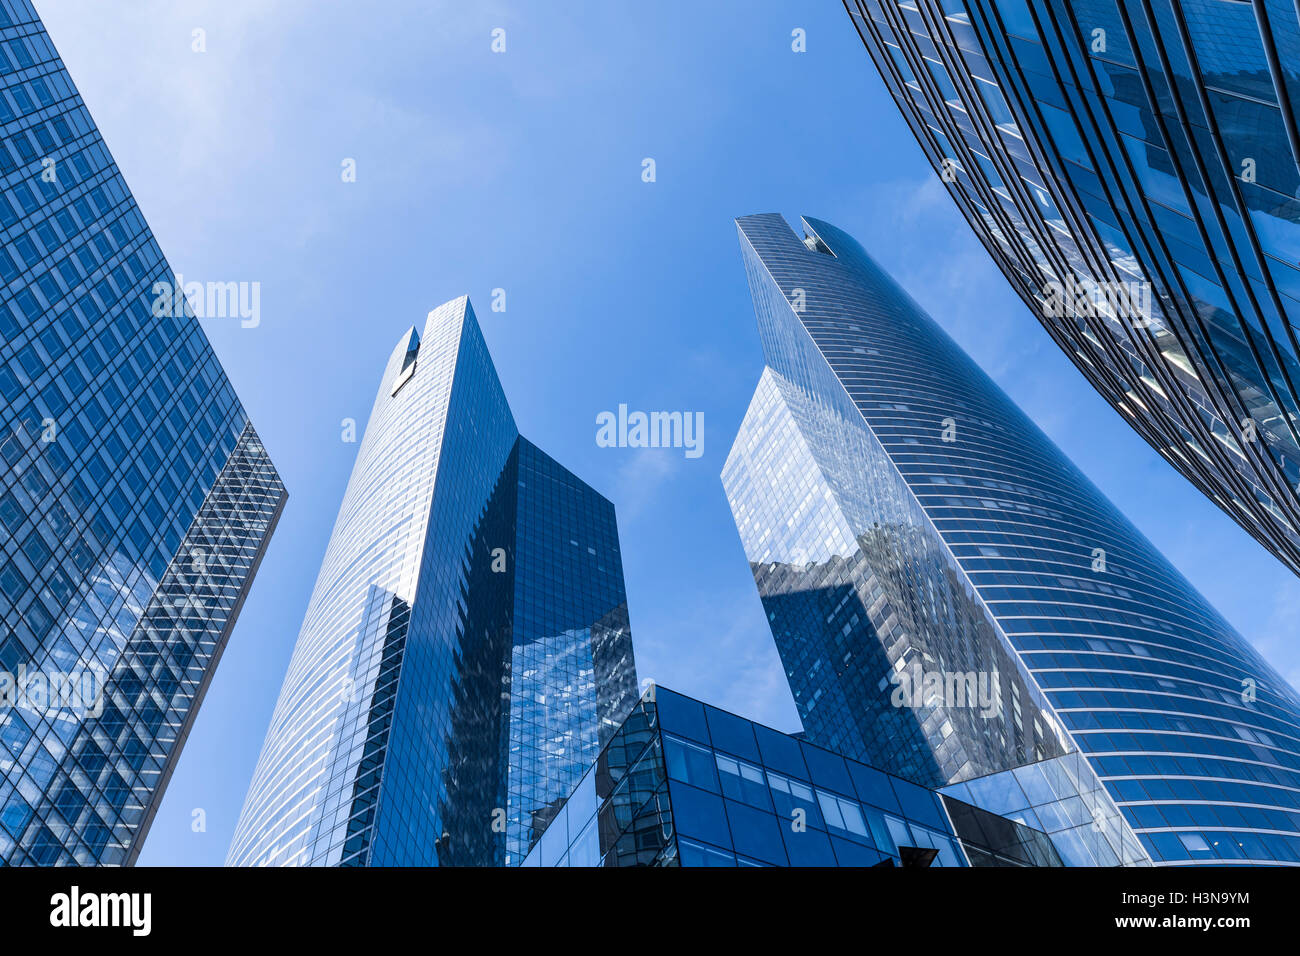 Banks and office buildings in business district Stock Photo